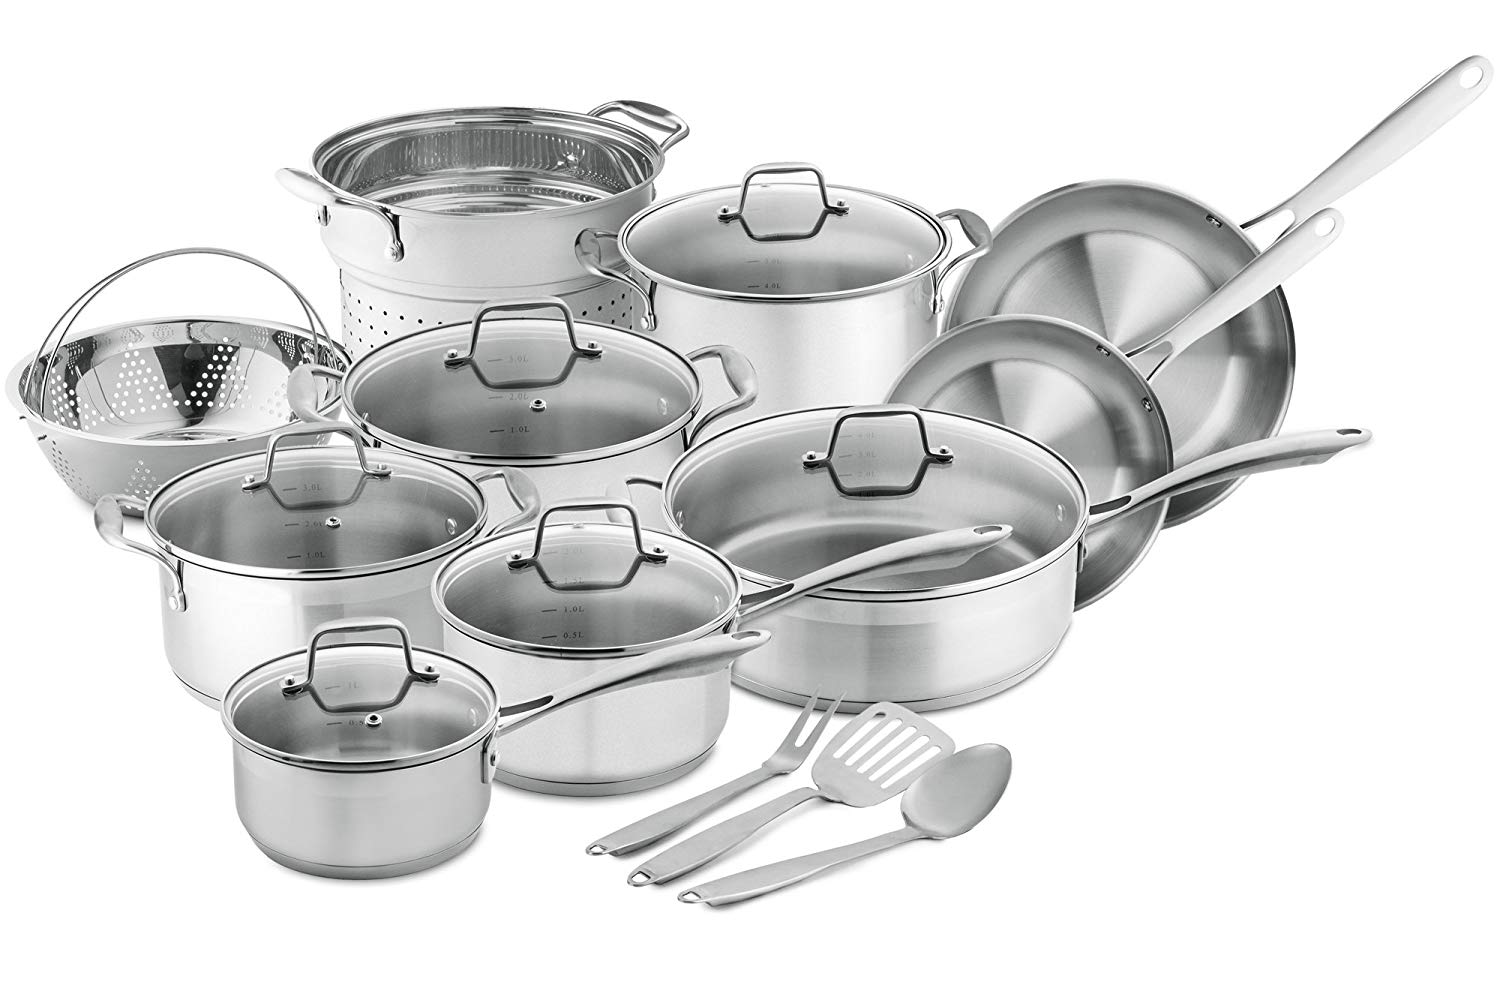 Chef’s Star 17-Piece Pots and Pans Stainless Steel Induction Cookware